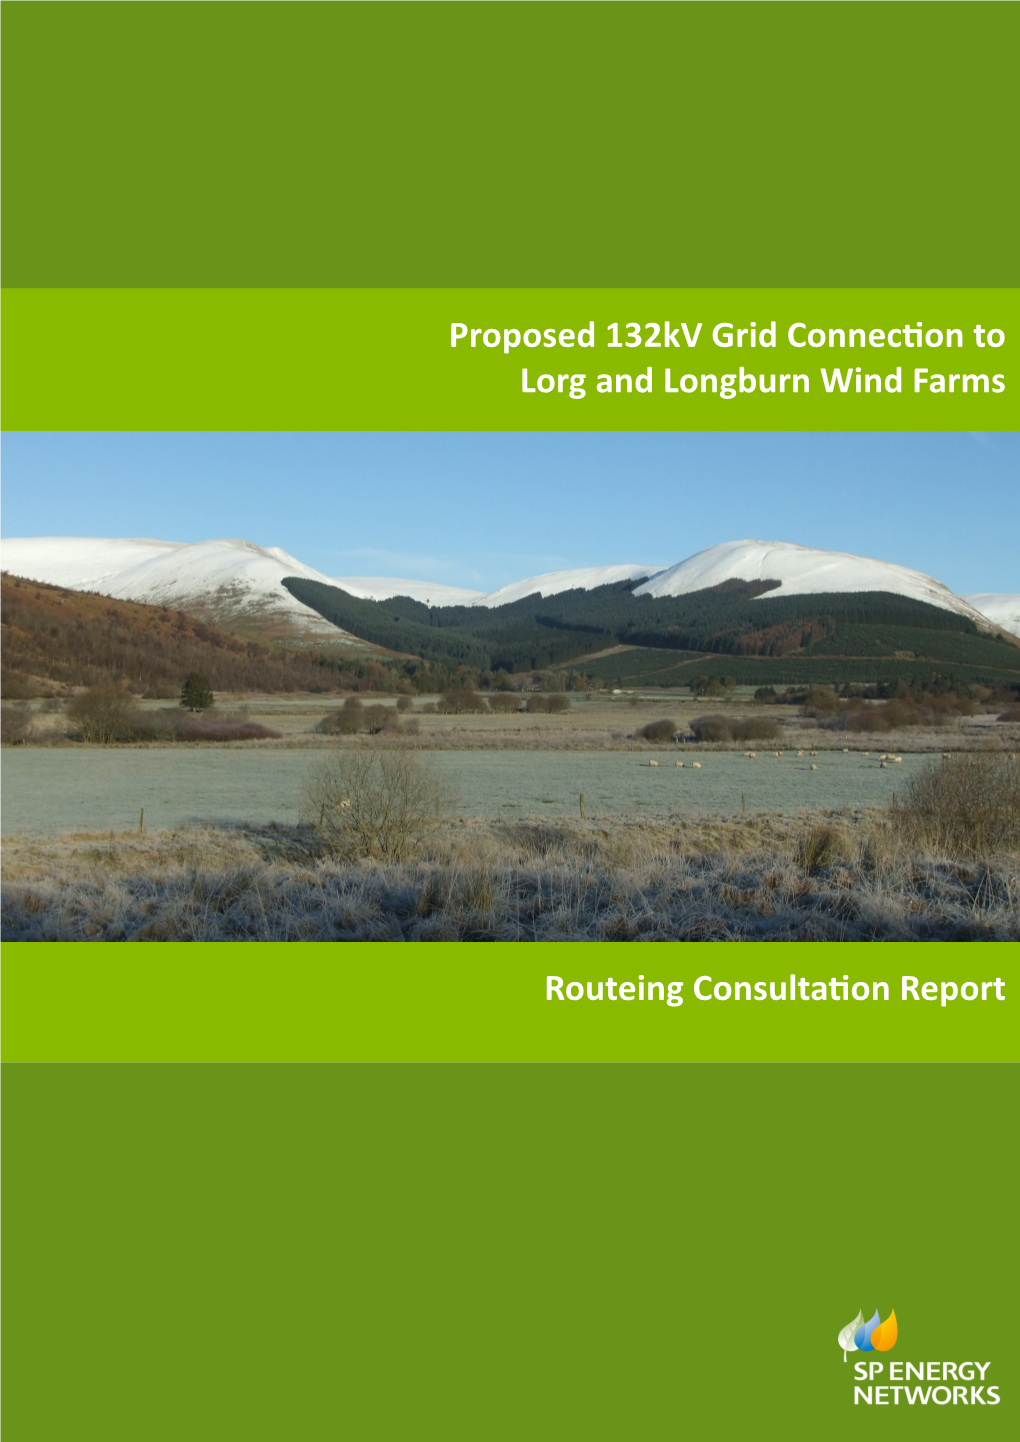 Lorg and Longburn Grid Connection Routeing Consultation Report